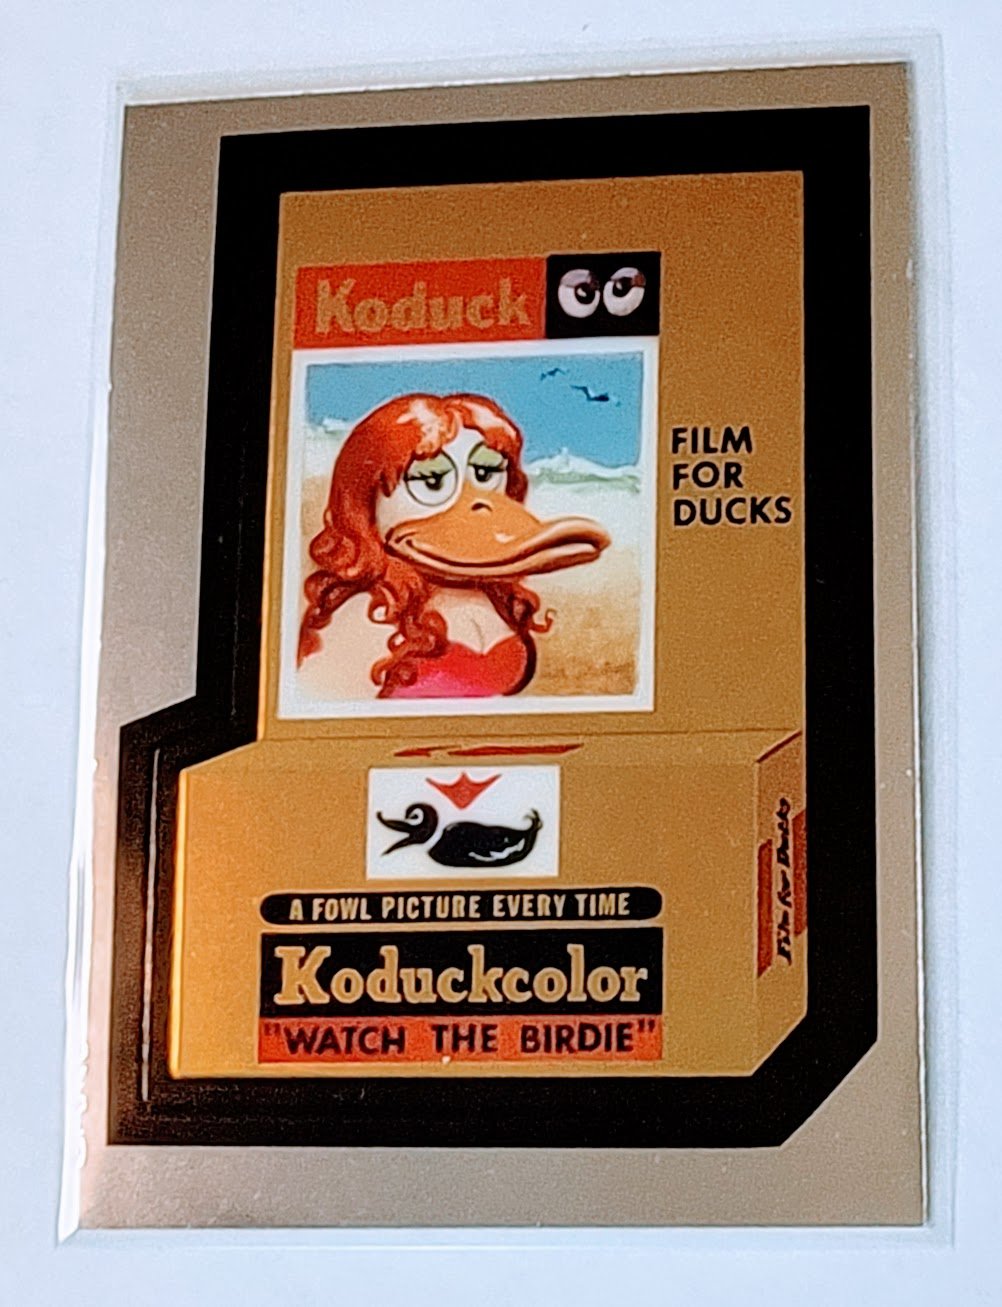 2014 Topps Chrome Wacky Packages Koduckcolor Film for Ducks Sticker Trading Card MCSC1 simple Xclusive Collectibles   